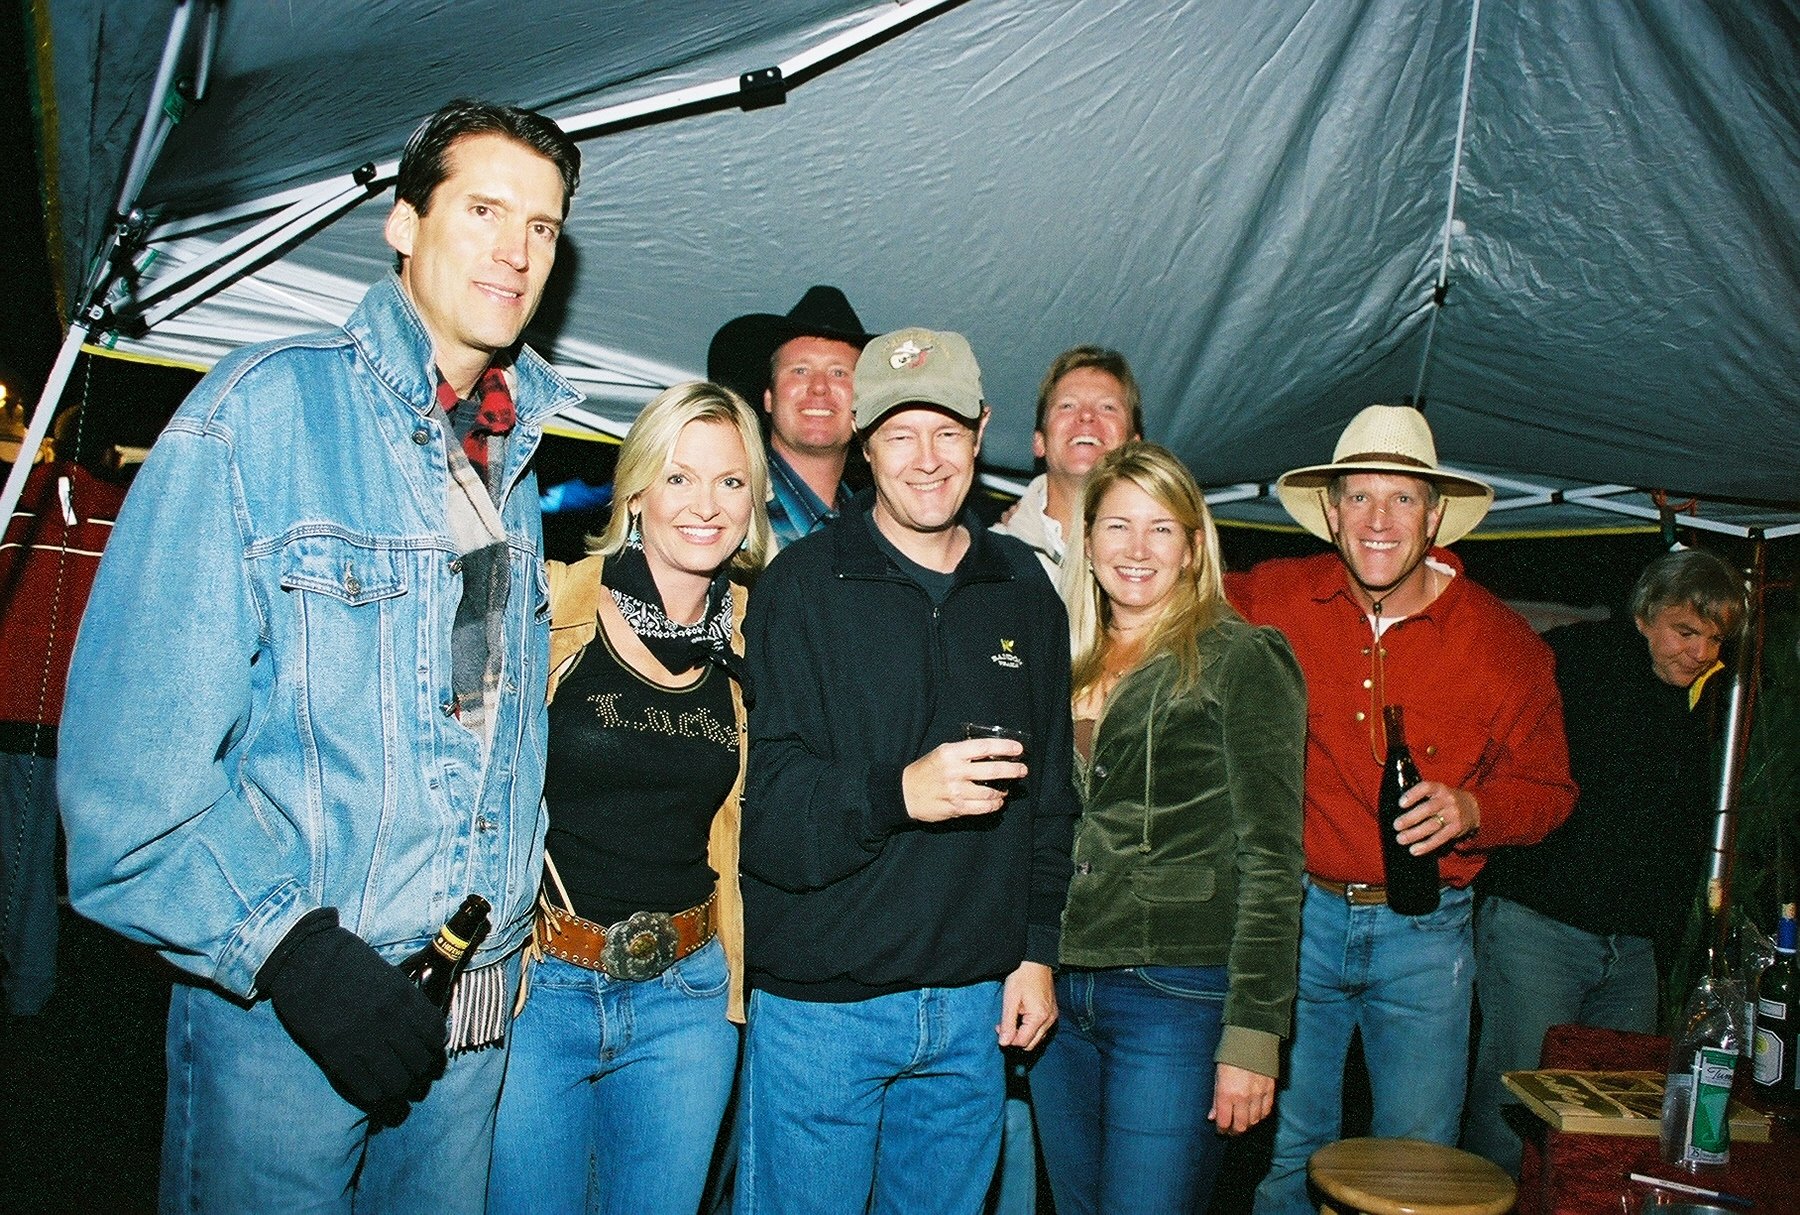 My fellow auxiliary members at the Barn Bash '06...We raised 76K for The Boys and Girls Aid Society...I'm in charge of the wine tent!